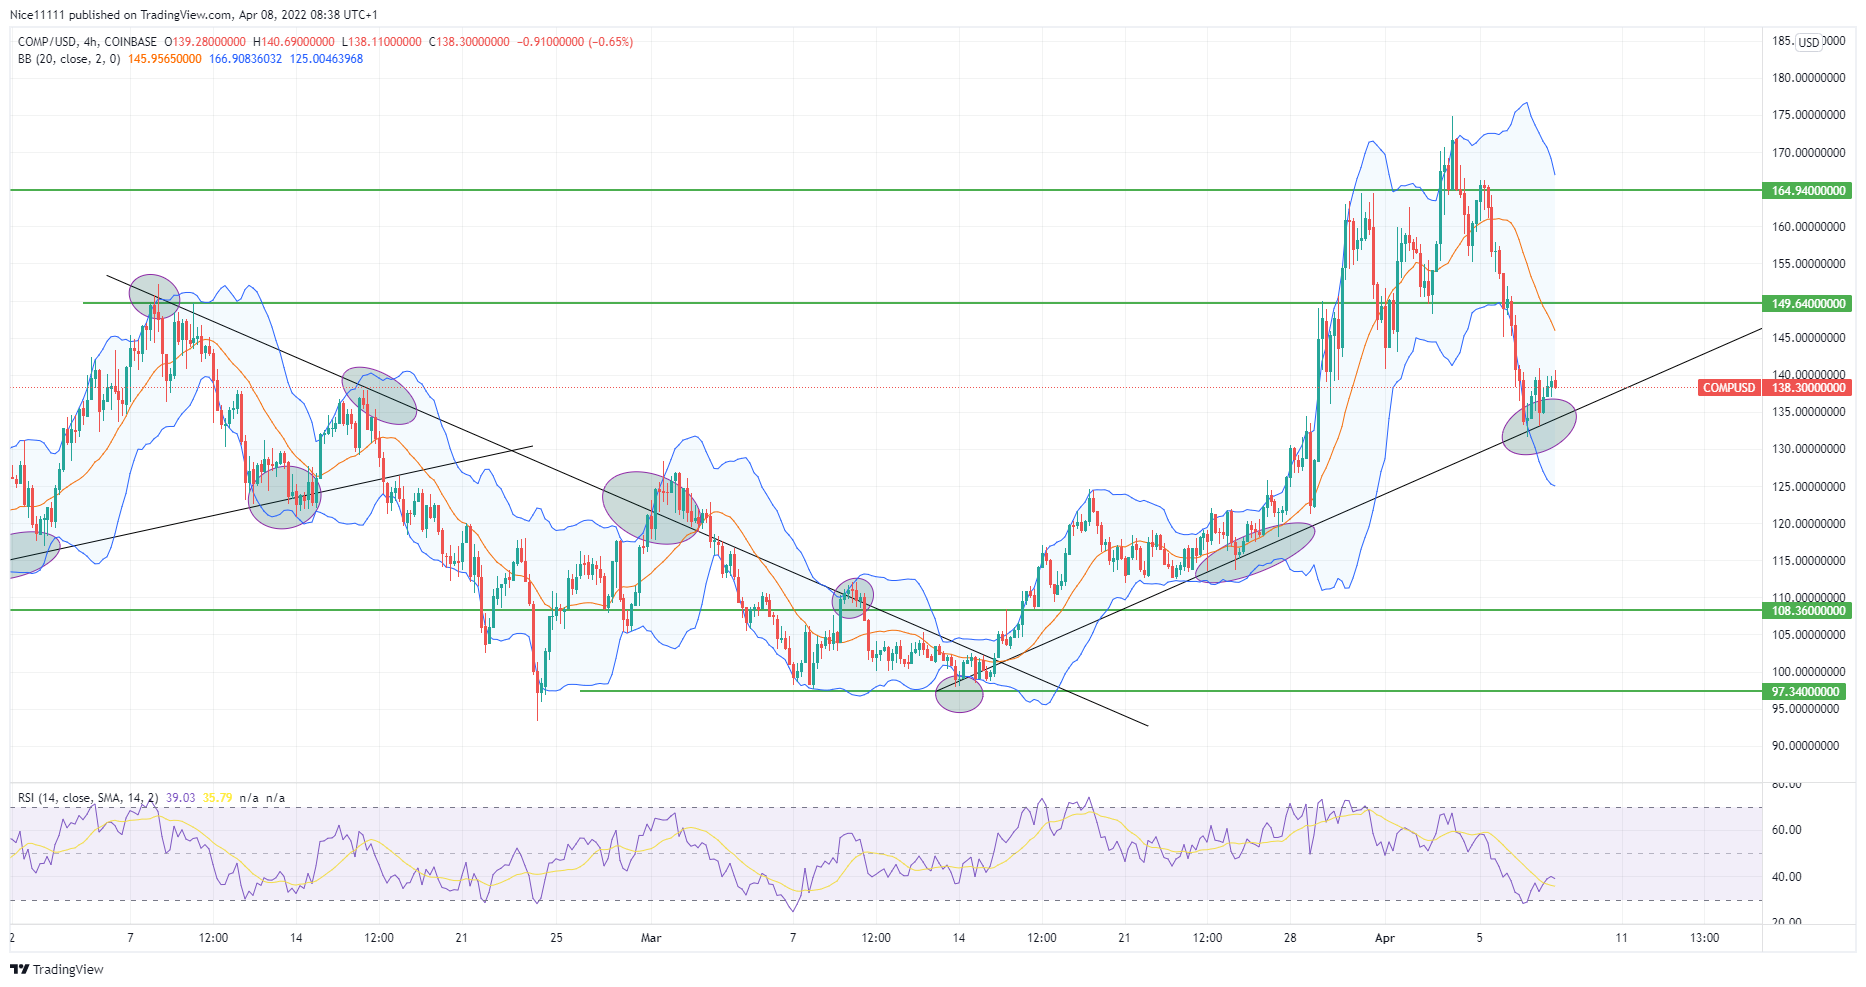 Compound (COMPUSD) Makes Its Third Touch on the Ascending Trend Line